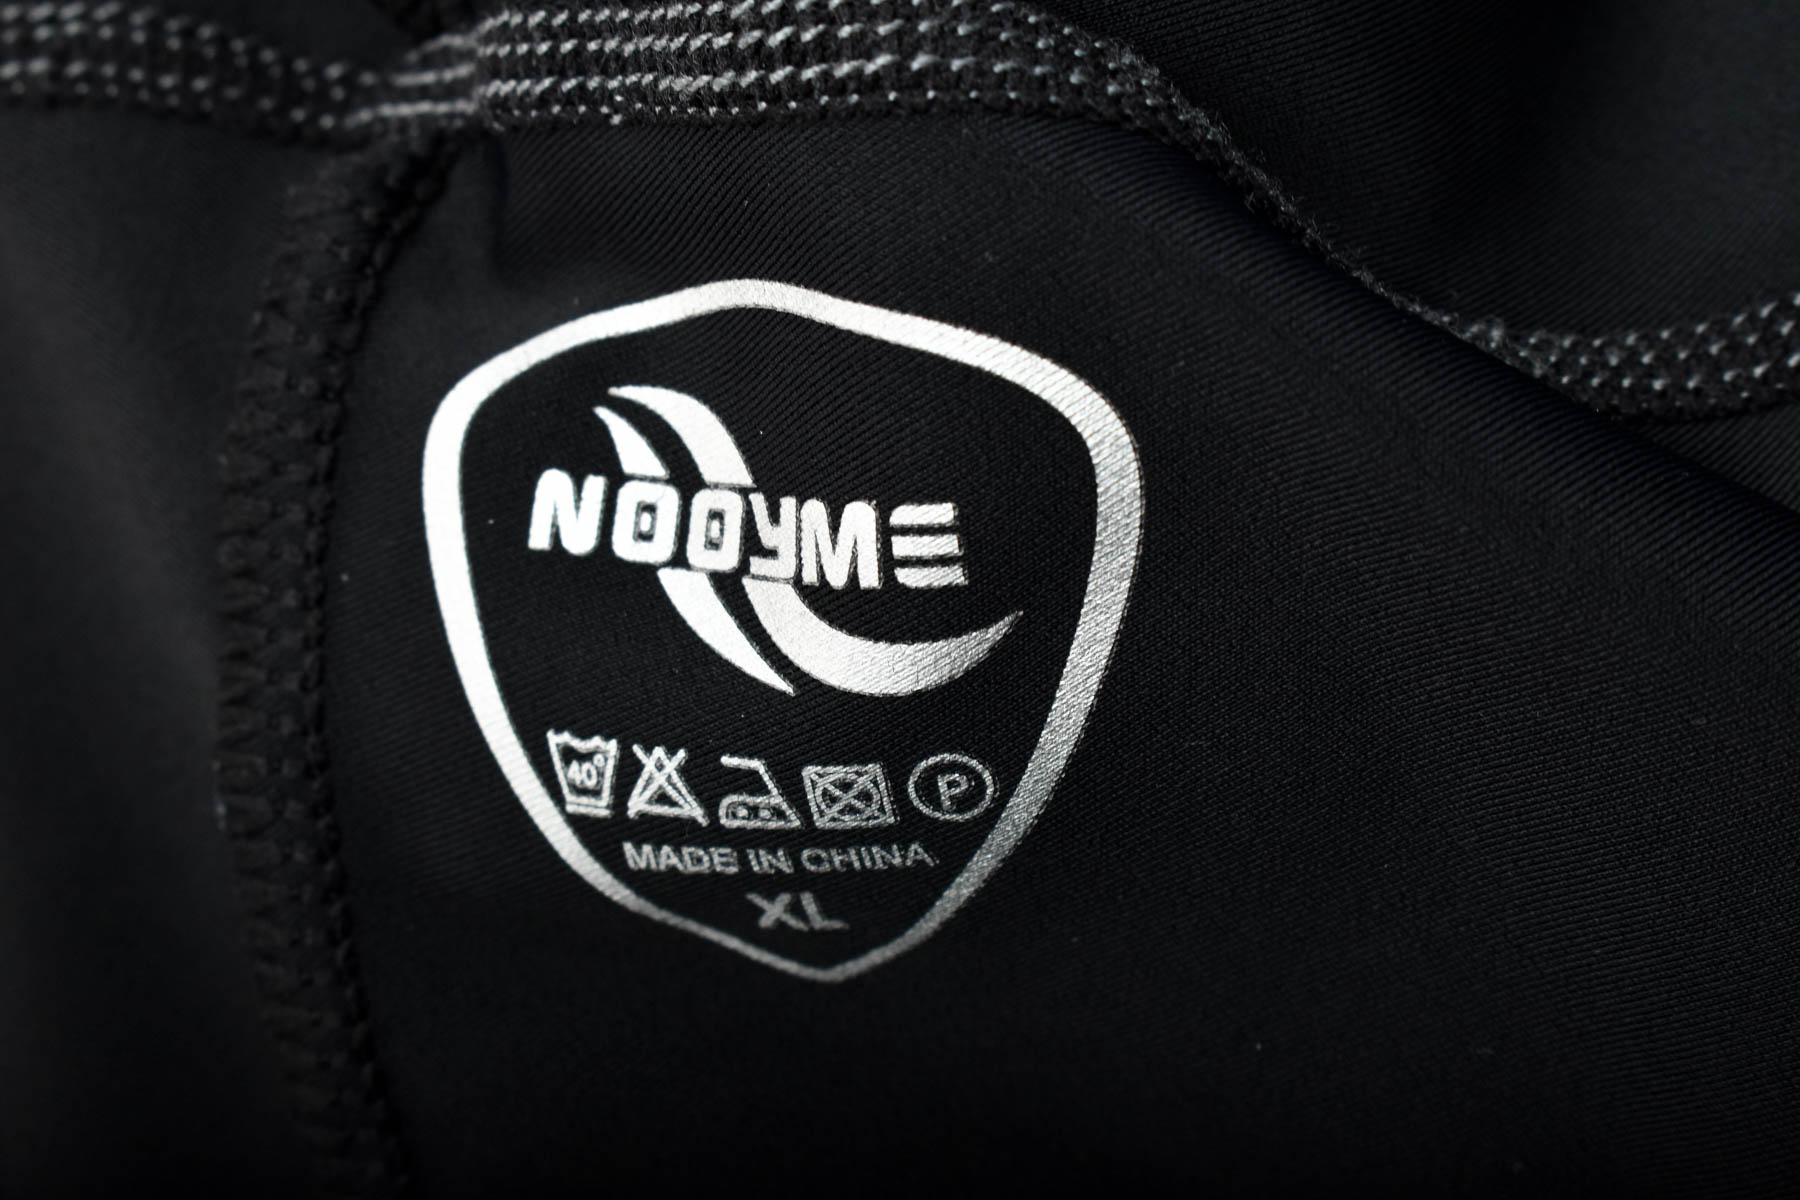 Men's shorts for cycling - NOOYME - 2